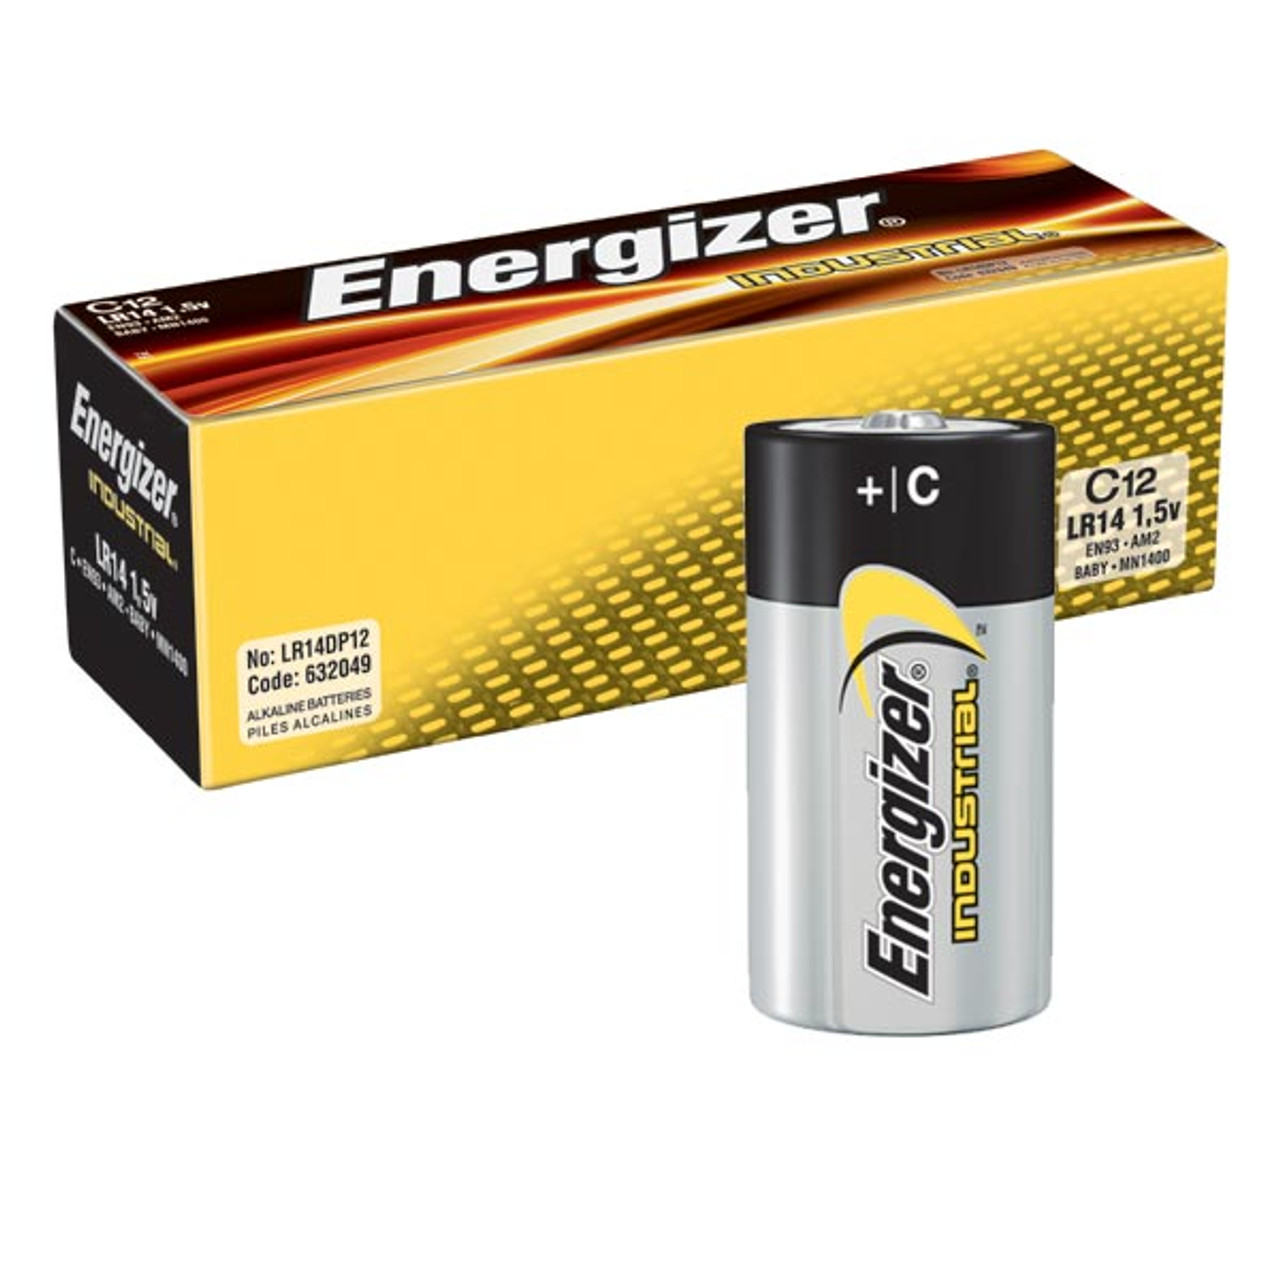 ENERGIZER INDUSTRIAL C SIZE (BOX OF 12)